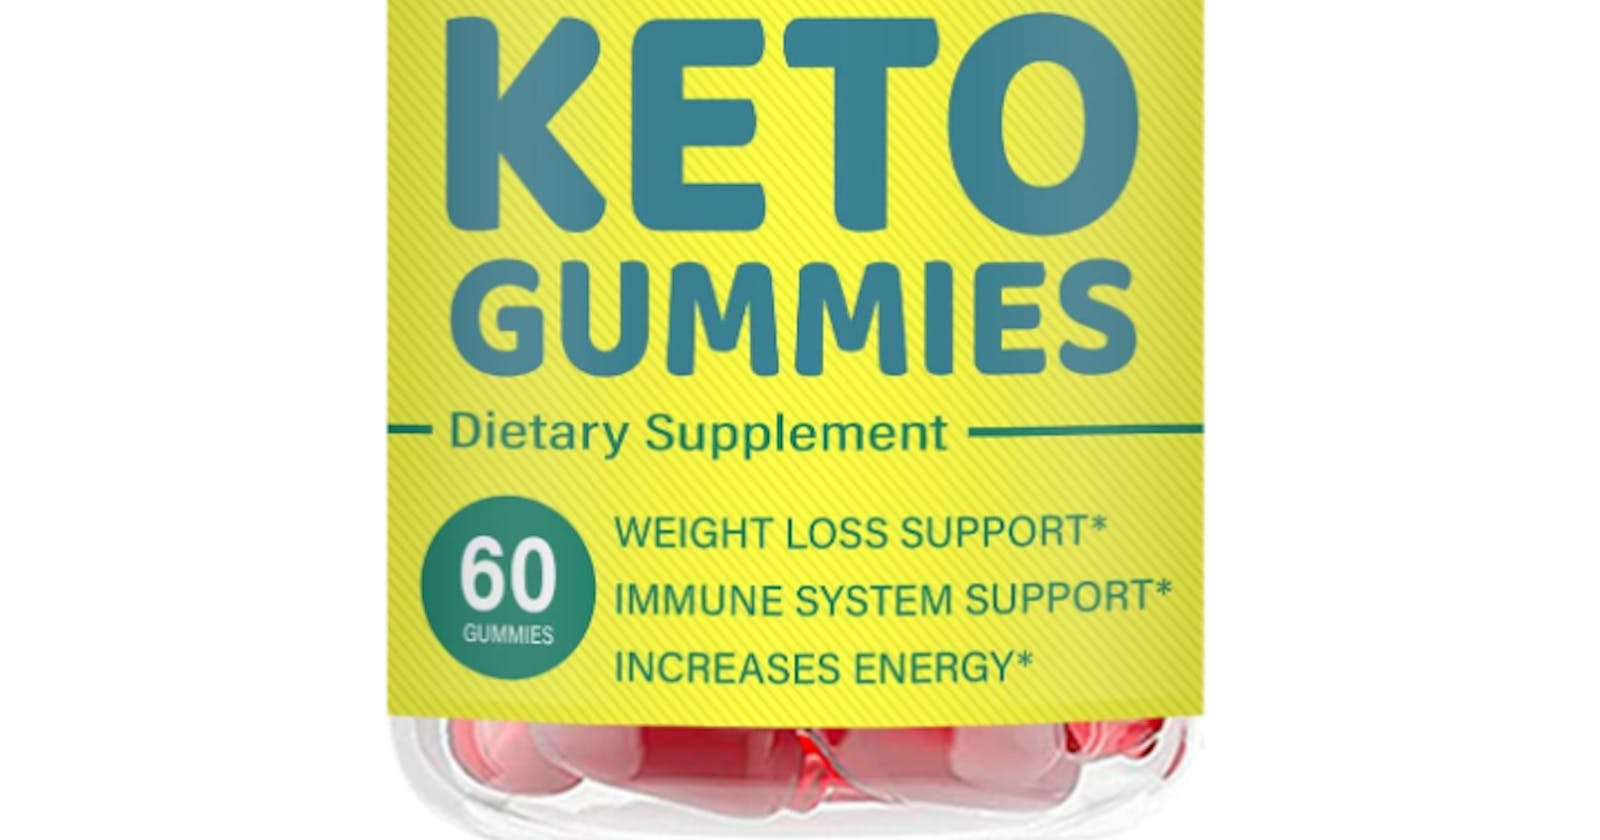 Lifesource Keto Gummies Reviews - Safe Weight Loss Supplement or Weak Ingredients?